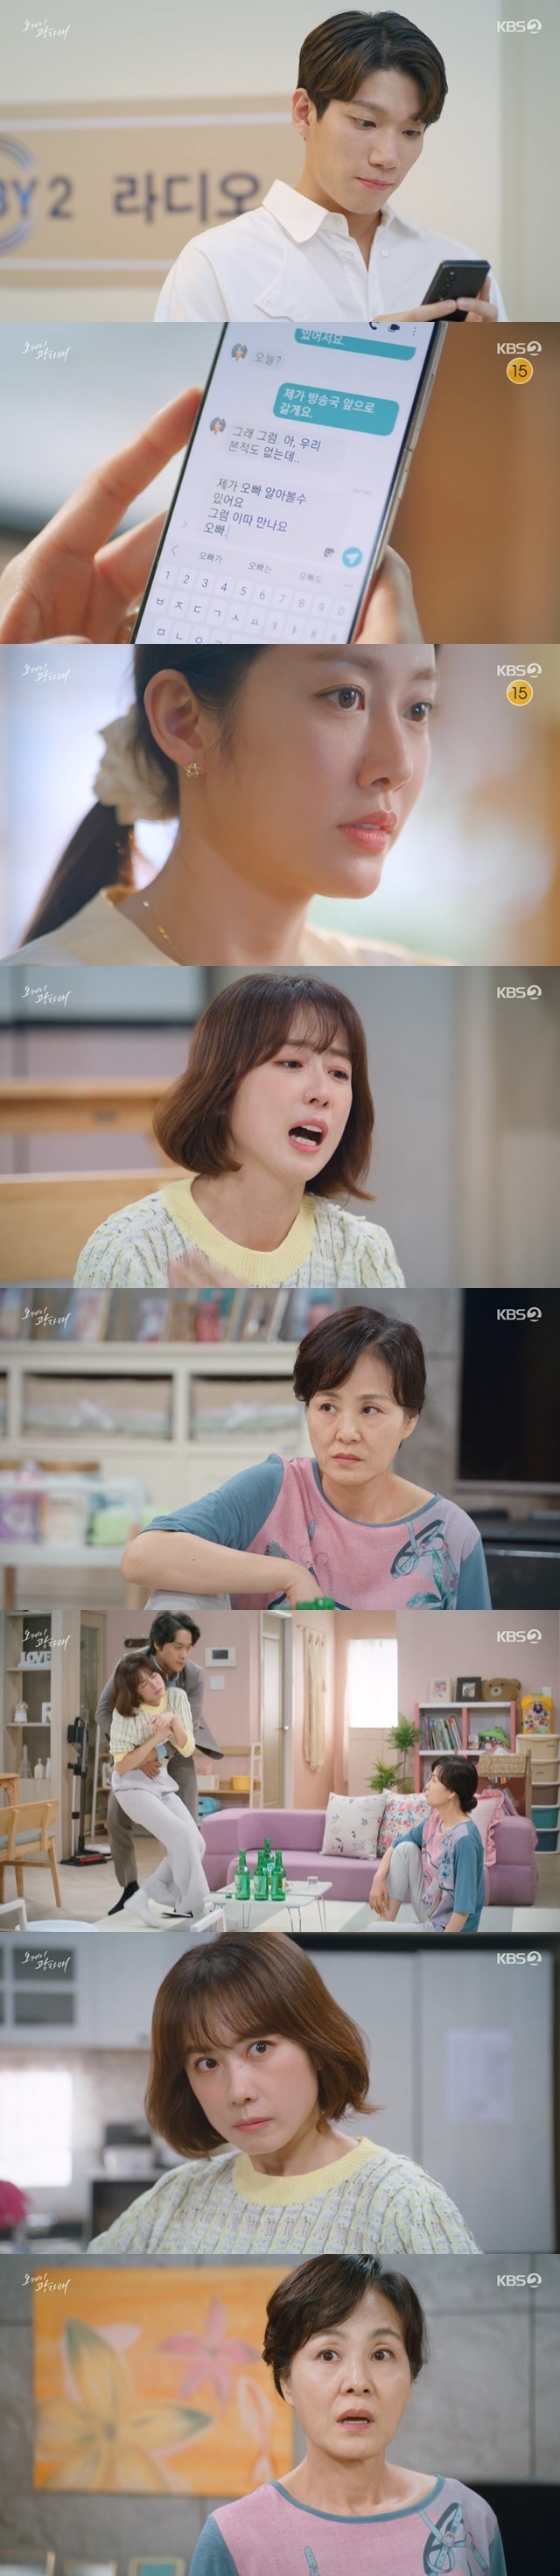 Hong Eun Hee Alcohol to Shimo Lee Sang Sook, and Kim Kyung Nam sold his wife Jeon Hye-bin.In the 46th KBS 2TV weekend drama OK Photo Sisters (playplayed by Moon Young-nam/directed by Lee Jin-seo), which aired on September 4, a crisis has hit sisters Lee Kwang-nam and Lee Kwang-sik (played by Jeon Hye-bin).Lee Cheol-soo (Yoon Ju-sang) went to Nachbum with a shovel in anger when she found out that her daughter, Lee Kwang-tae (Ko Won-hee), and her father, Nachbum (Jung Seung-ho), had ripped money from her son-in-law, Huh Gi-jin (Seok Jeong-hwan).Nachbum said, Did not you catch the miscreant Wind because of me? And Lee Chul-soo said, I did not need a child because I told you that I would divorce when I was pregnant with a madness.Lee said, I have written a memorandum to come and threaten me if I fall down and do not look for madness again.I am a child from the moment I was born 29 years ago, said Lee. I have legal rights, Nach said. You changed the law because of you.You dont have to treat your own son like you like him. Youre dead today and Im dead.Lee Cheol-soo told Hung Gi-jin that he would not be able to come, and Oh Bong-ja (Lee Bo-hee) was worried that Lee Kwang-nam and Lee Kwang-sik (Jeon Hye-bin) would be subject to the same thing.Lee Cheol-soo met with his daughter Lee Kwang-nam and Lee Kwang-sik separately and asked them to ignore them if a stranger comes.Lee Kwang-sik heard about his father, Lee Cheol-soo and Kim Yeong-hee (Lee Mi-young), from his aunt Oh Bong-ja, and all the photons visited Kim Yeong-hee and met him.Kim Yeong-hee said, My brother only needs to raise a spoon, saying that he is ready for his retirement, but the photon did not believe Kim Yeong-hee because of his past experience of being deceived by Hwang Chun-gil (Seo Do-jin).Lee Kwang-nam visited the runaway Shimo Jipungnyeon (Lee Sang-sook), but the Jipungnyeon did not move.Lee Kwang-tae was admitted to the hospital because of anemia and was hit by Ringer. Hung Gi-jin was surprised when Nach came to the hospital and gave 50 million won in money.When Lee Chul-soo found out about it, he went to Nachbum again and Oh Bong-ja hit Nachbum instead, saying, If you hit him and go to the police station, you will lose your brother.Lee Chul-soo gave Nachbum a luxury watch given by Hung Gi-jin for 1.5 million won for all his assets and said not to come back again, but Nachbum was even angry at gambling.Otangza (Kim Hye-sun) was allowed to live with Kim Min-ho for three years, and introduced Kim Min-ho to his photon as his daughter Ottogi (Hongjae) father.Lee Kwang-tae was surprised that Byun Gong-chae, younger than himself, was his uncle.Otangza also bluffed Lee Kwang-sik to be nervous because her husband Han Ye-seul (Kim Kyung-nam) is a good younger son, and Lee Kwang-sik began to nervously.Han Ye-seul did not care about his wife Lee Kwang-sik when he became busy with Singer, and he was distracted by the fans autographs and photo requests at the sushi restaurant that he visited for a long time.Even though Lee Kwang-sik bought cosmetics and underwear and waited for Han Ye-seul, Han Ye-seul did not deal with it because of the phone call.When Lee Kwang-sik was especially jealous of the fan club star, Han Ye-seul sided with the star.